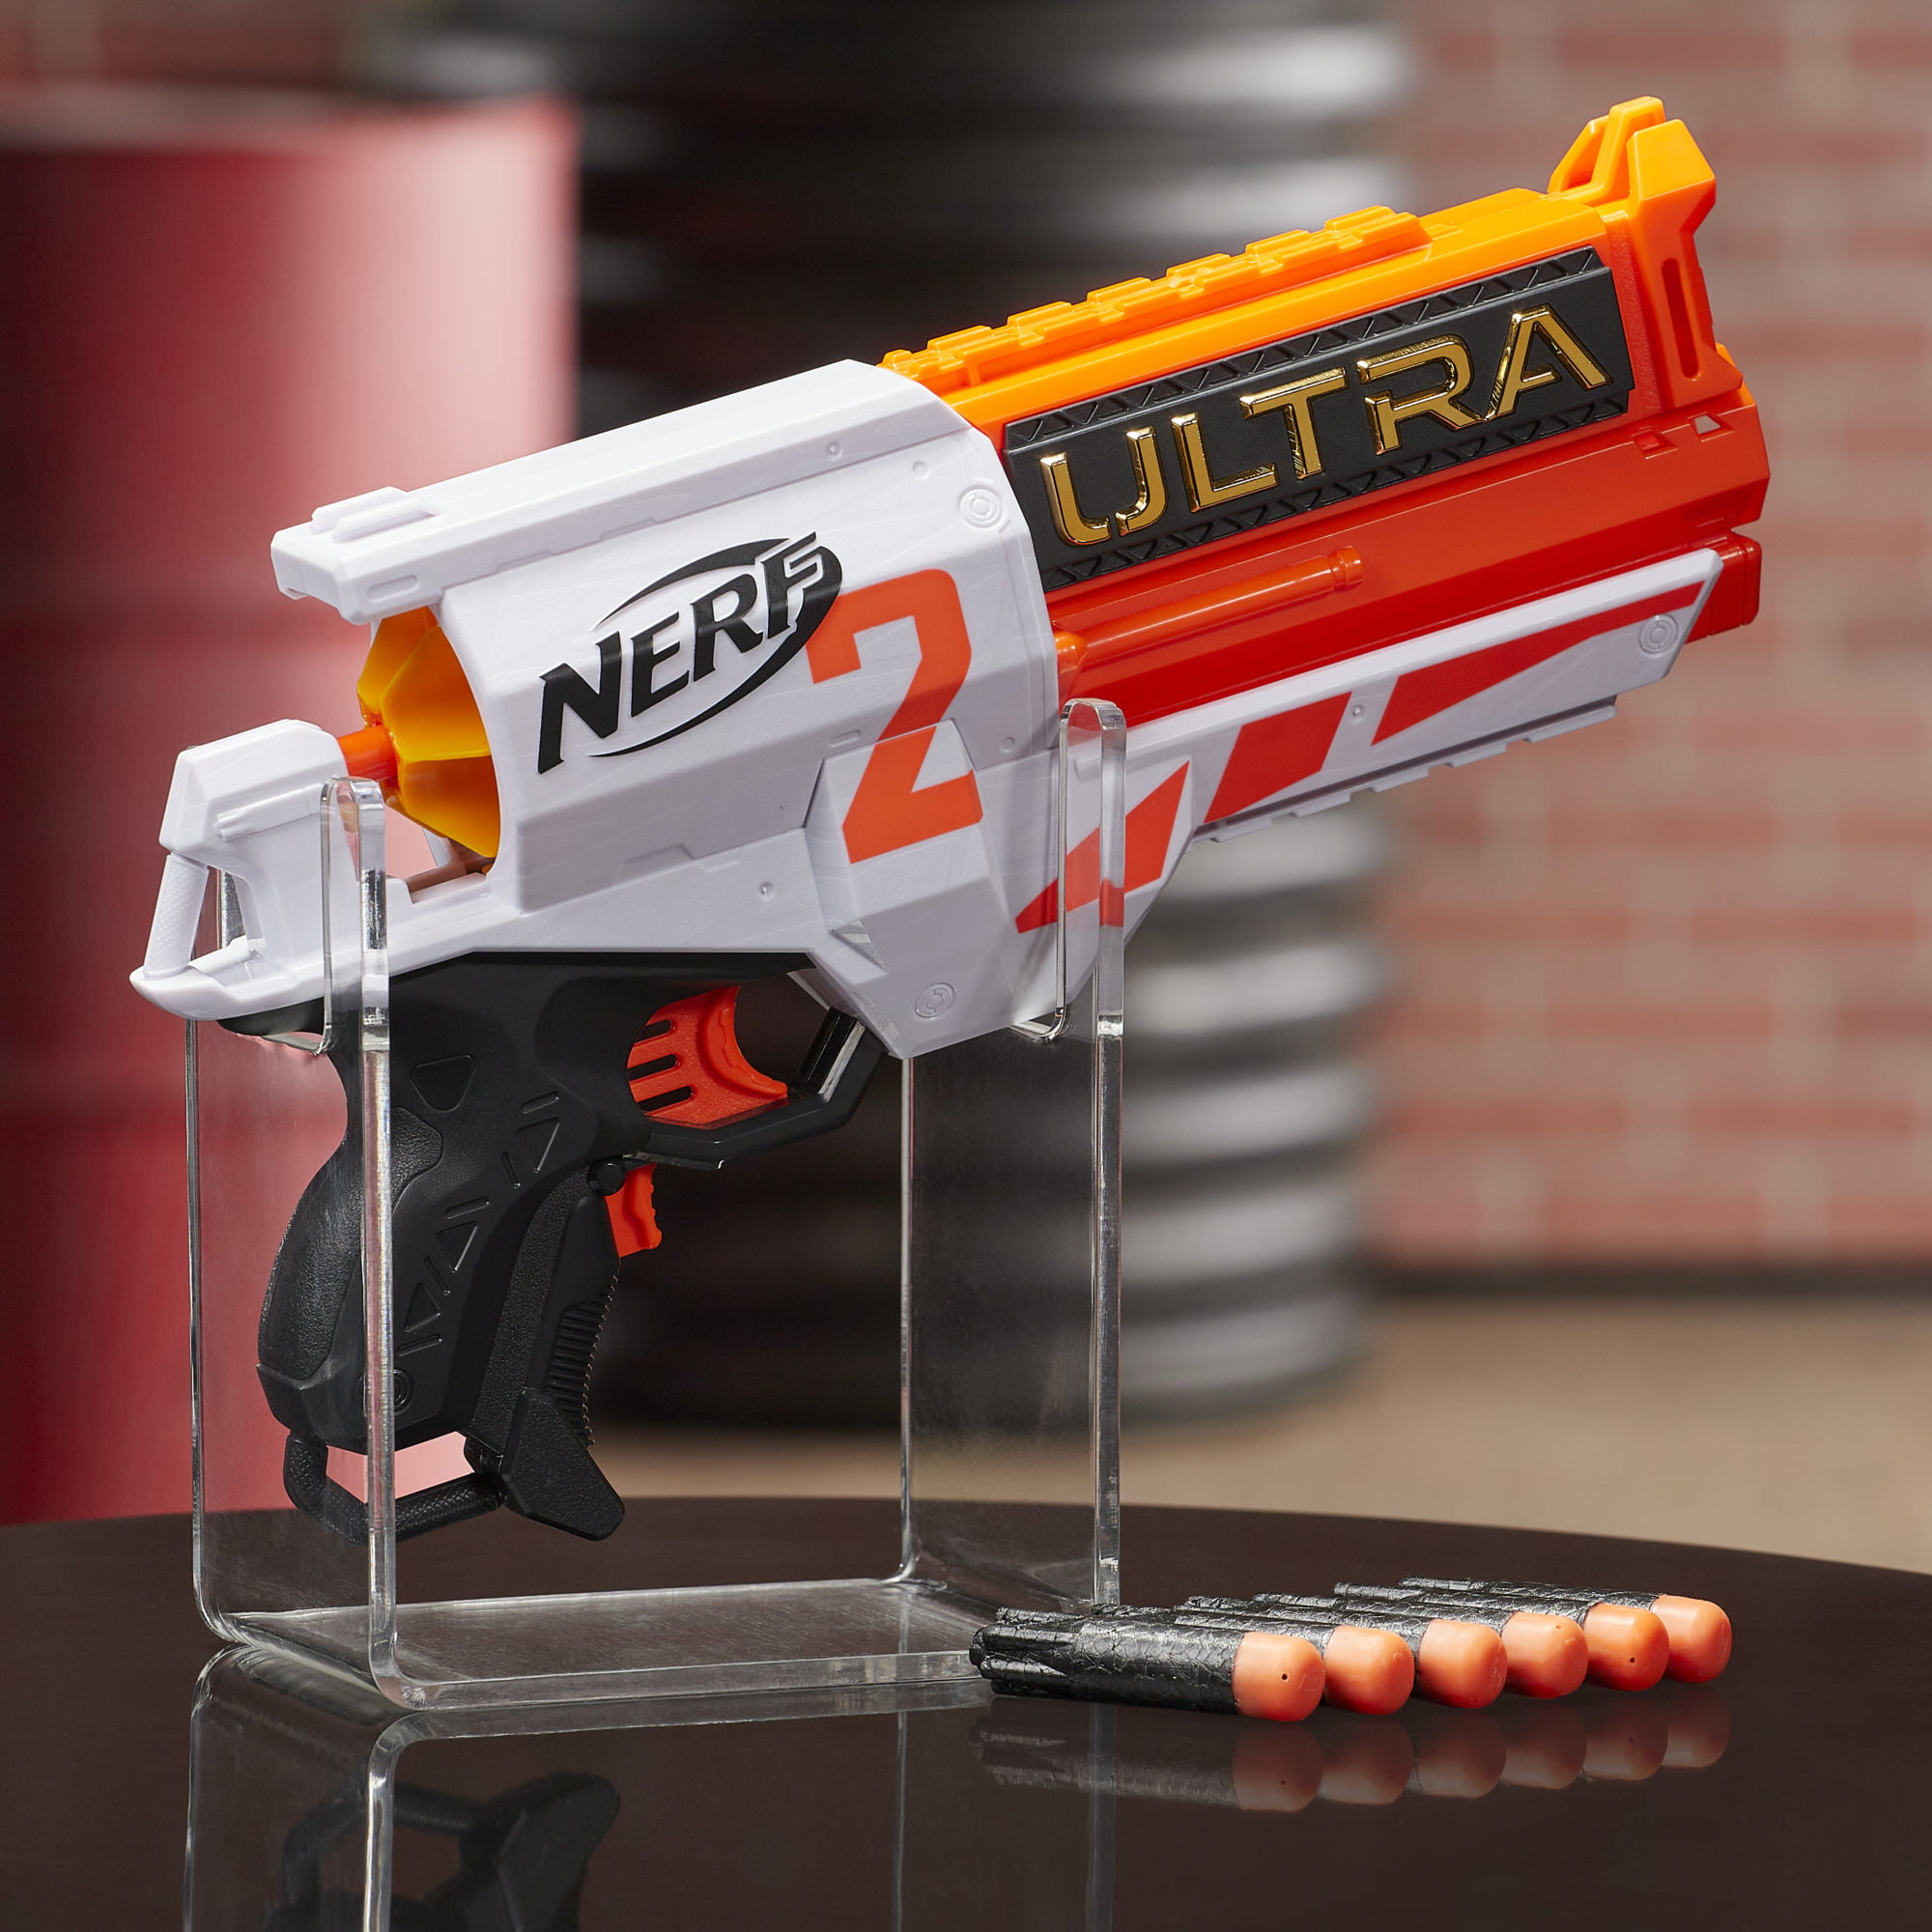 Nerf Ultra Two Blaster, Includes 6 Official Nerf Ultra Darts - Walmart.com